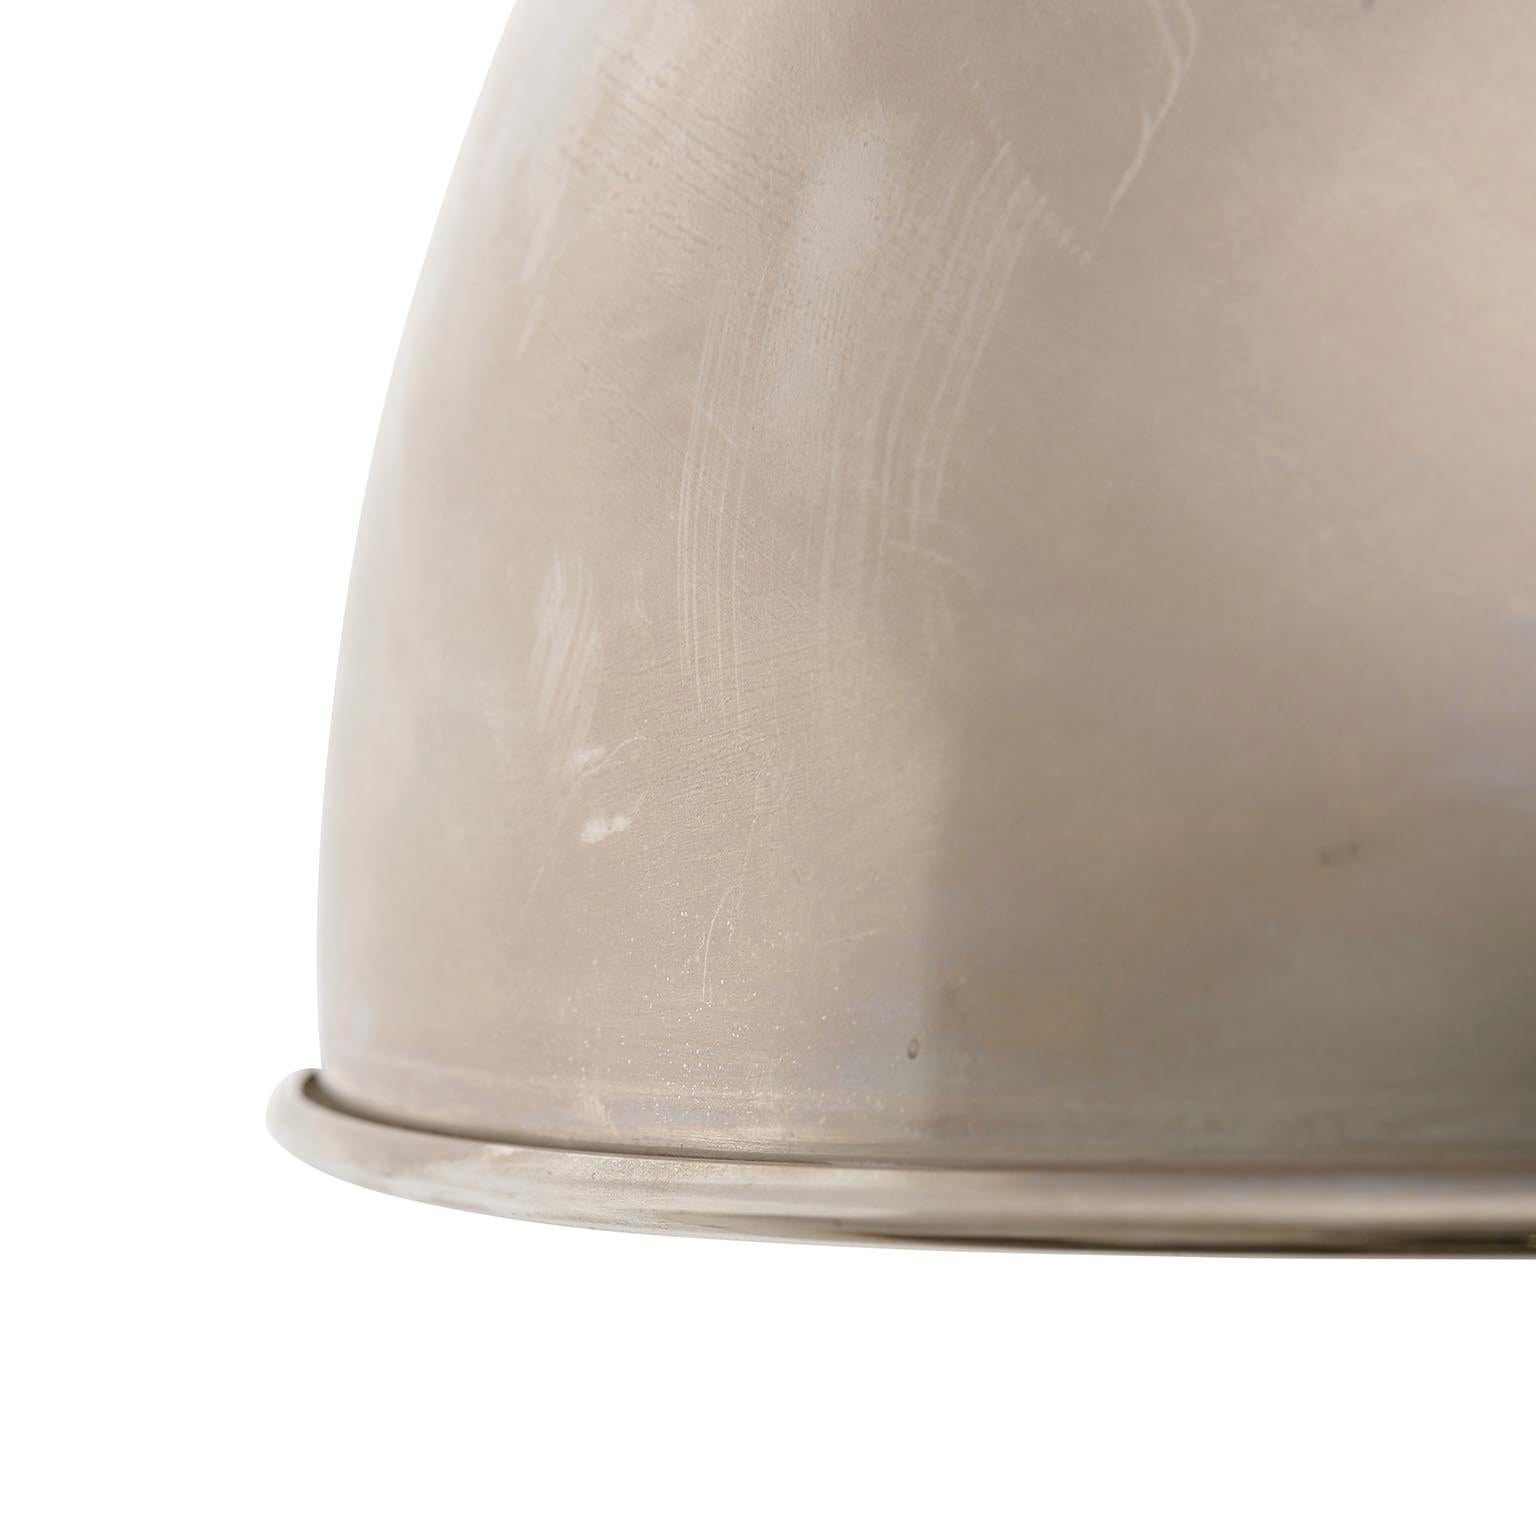 Florian Schulz Dome Pendant Light, Patinated Nickel, Counterweight, 1970 1